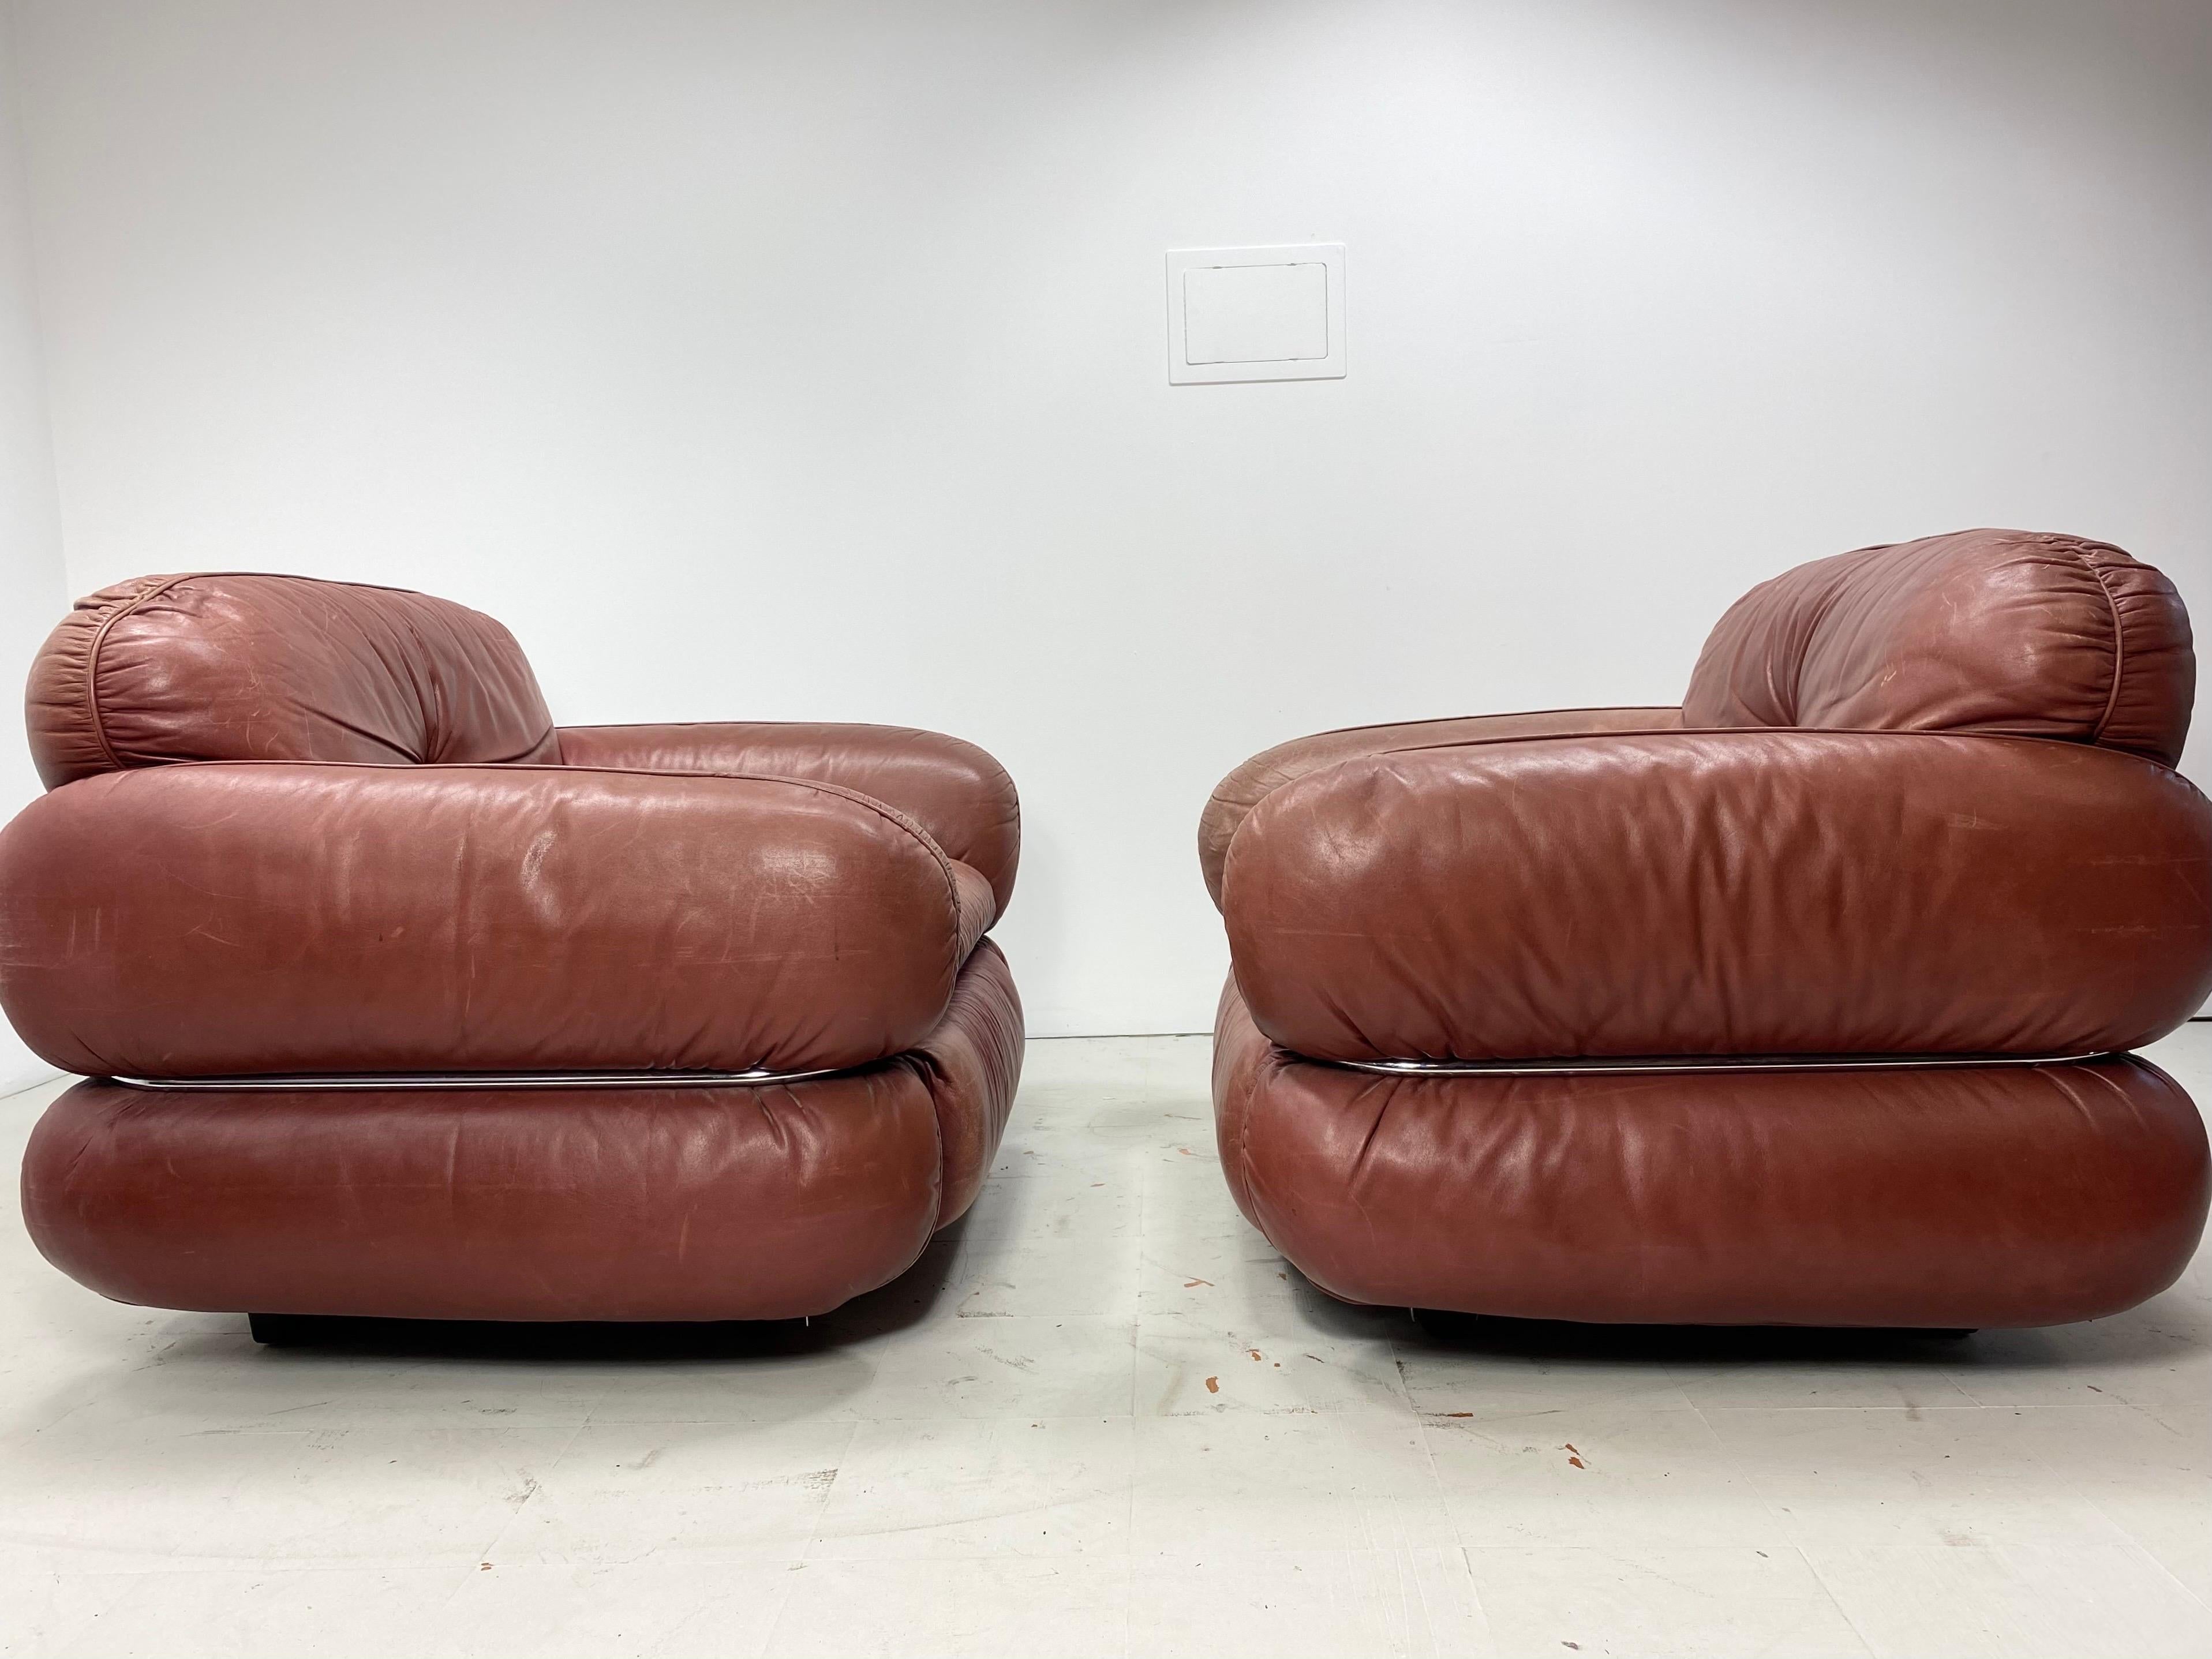 Pair of 1970’s “Hannibal” lounge chairs by Kurt Hvitsjö for Isku. Leather with chrome frame. Front castors. Original Auburn leather is nicely worn. Finland

NYC Delivery available for $425.  Please inquire before purchase.